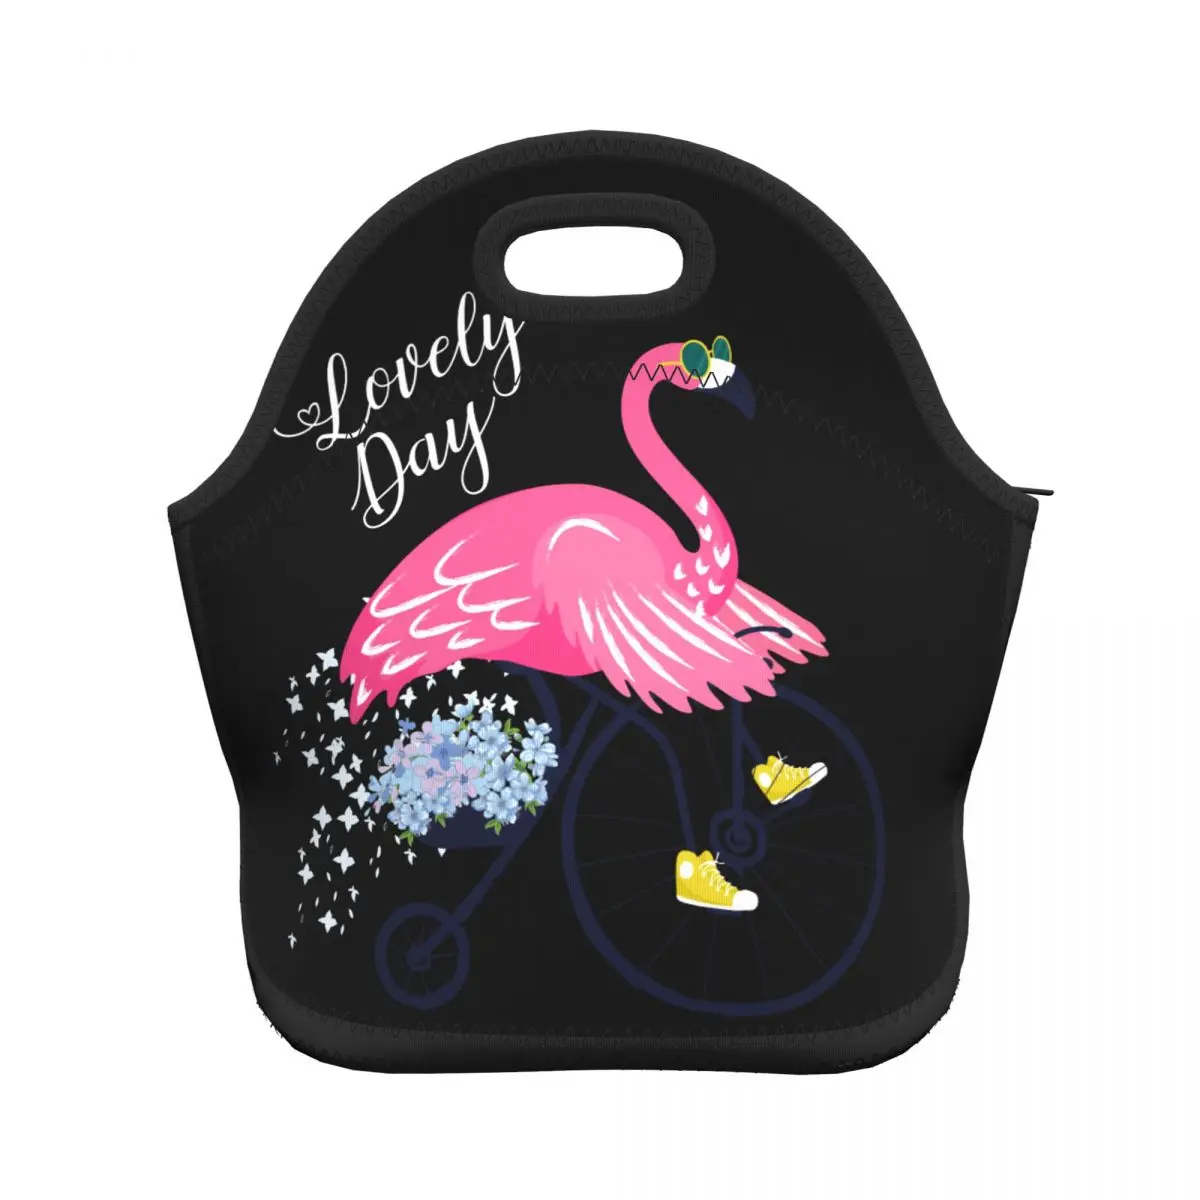 

Flamingo Women Girls Lunch Bags for Work School Picnic Camping Neoprene Top Handle Lunch Box Fruits Drinks Organizer Pouch Bags